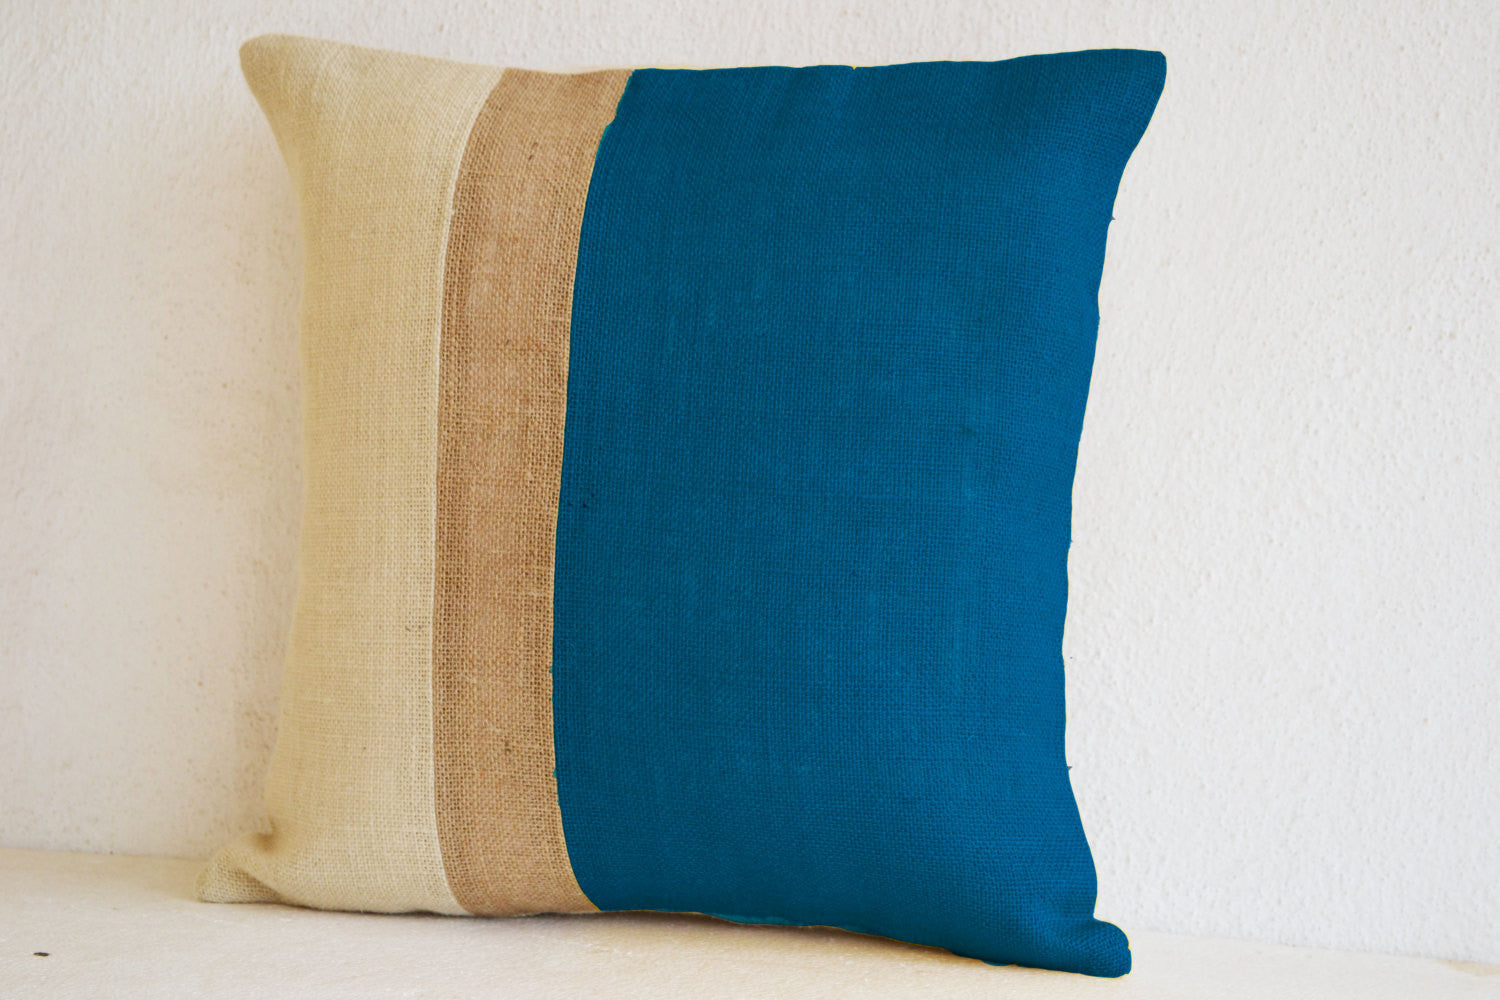 Handmade jute pillow covers in different colors and color block